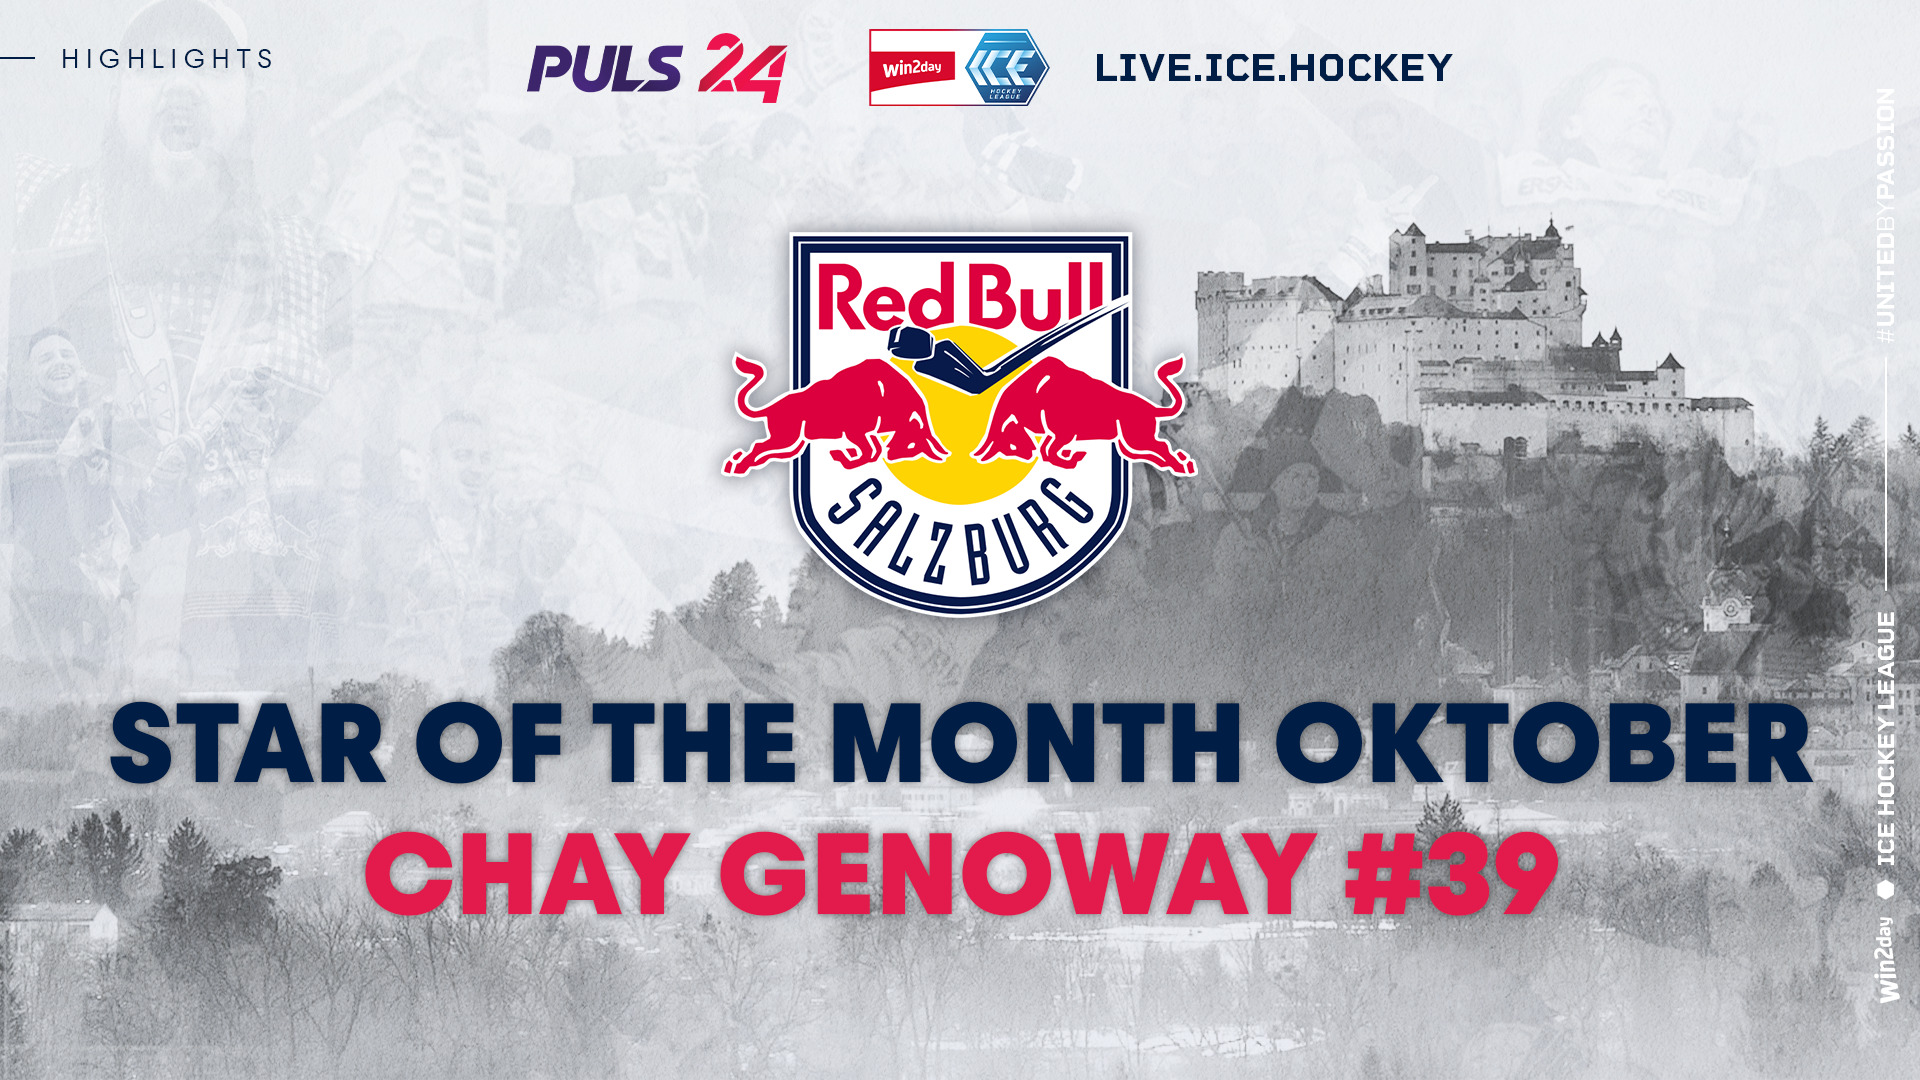 Star of the Month Oktober - Chay Genoway